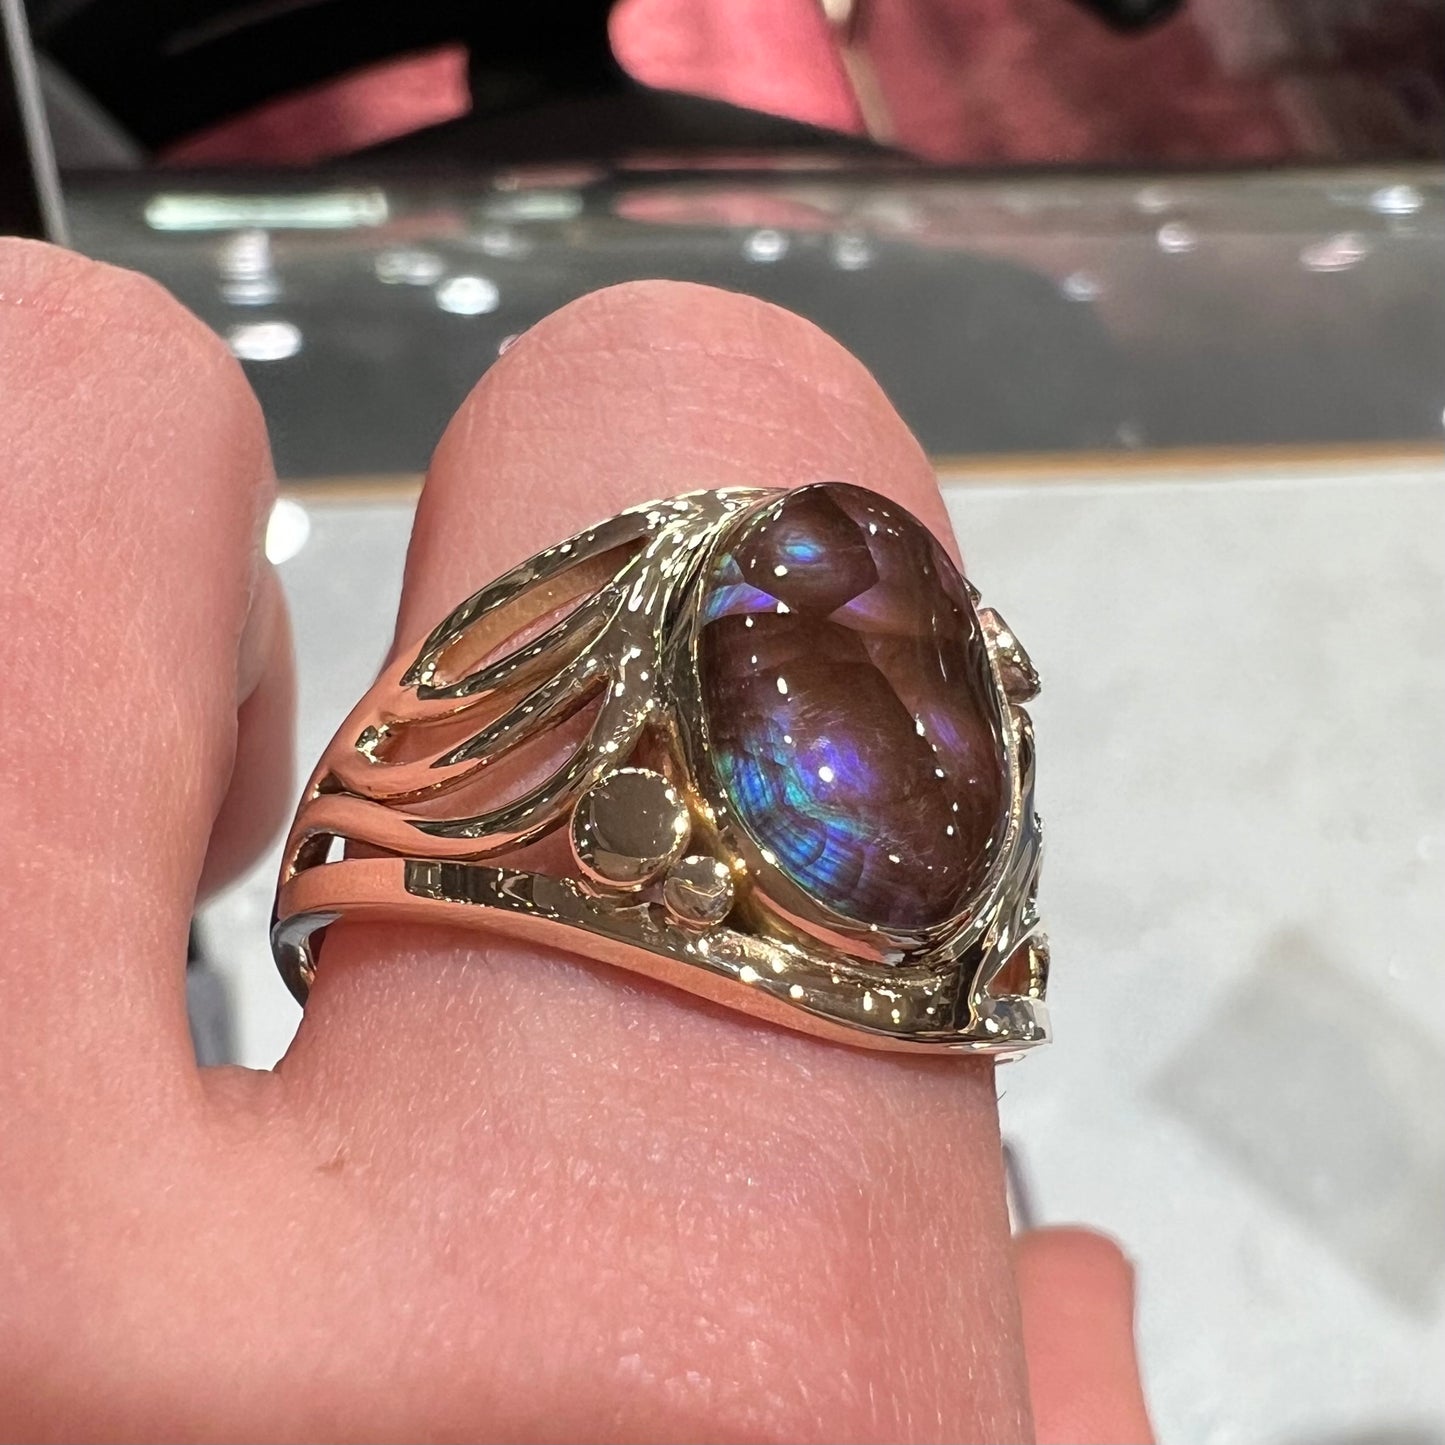 An oval cabochon cut fire agate with purple and blue colors set in a yellow gold men's ring.